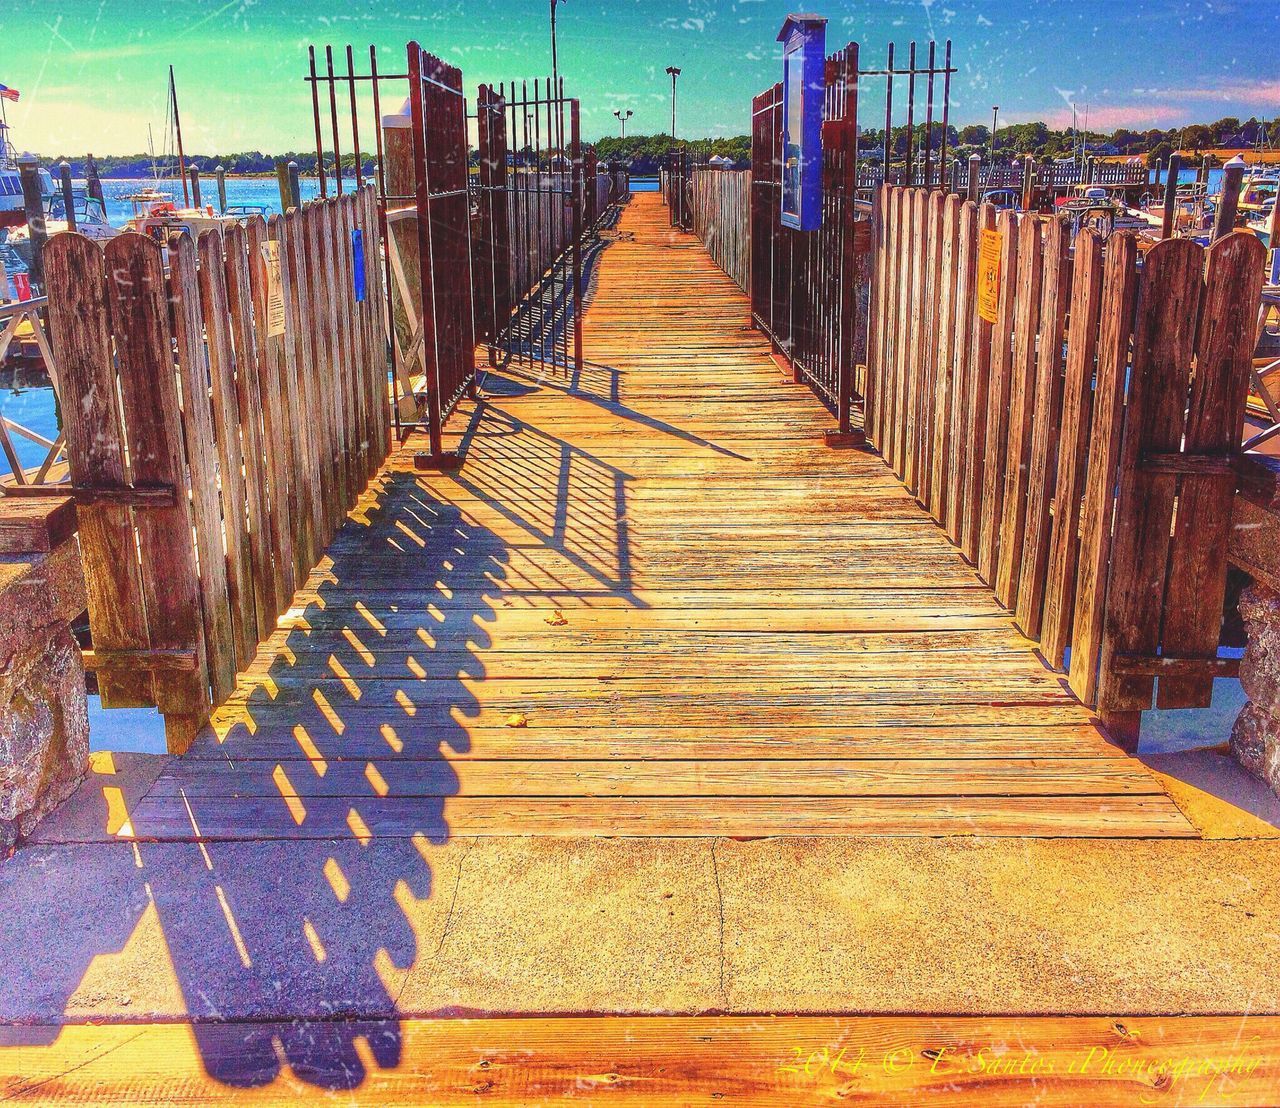 sea, pier, water, wood - material, the way forward, boardwalk, beach, sand, wooden, railing, jetty, diminishing perspective, wood, tranquility, sky, in a row, tranquil scene, shore, wood paneling, nature